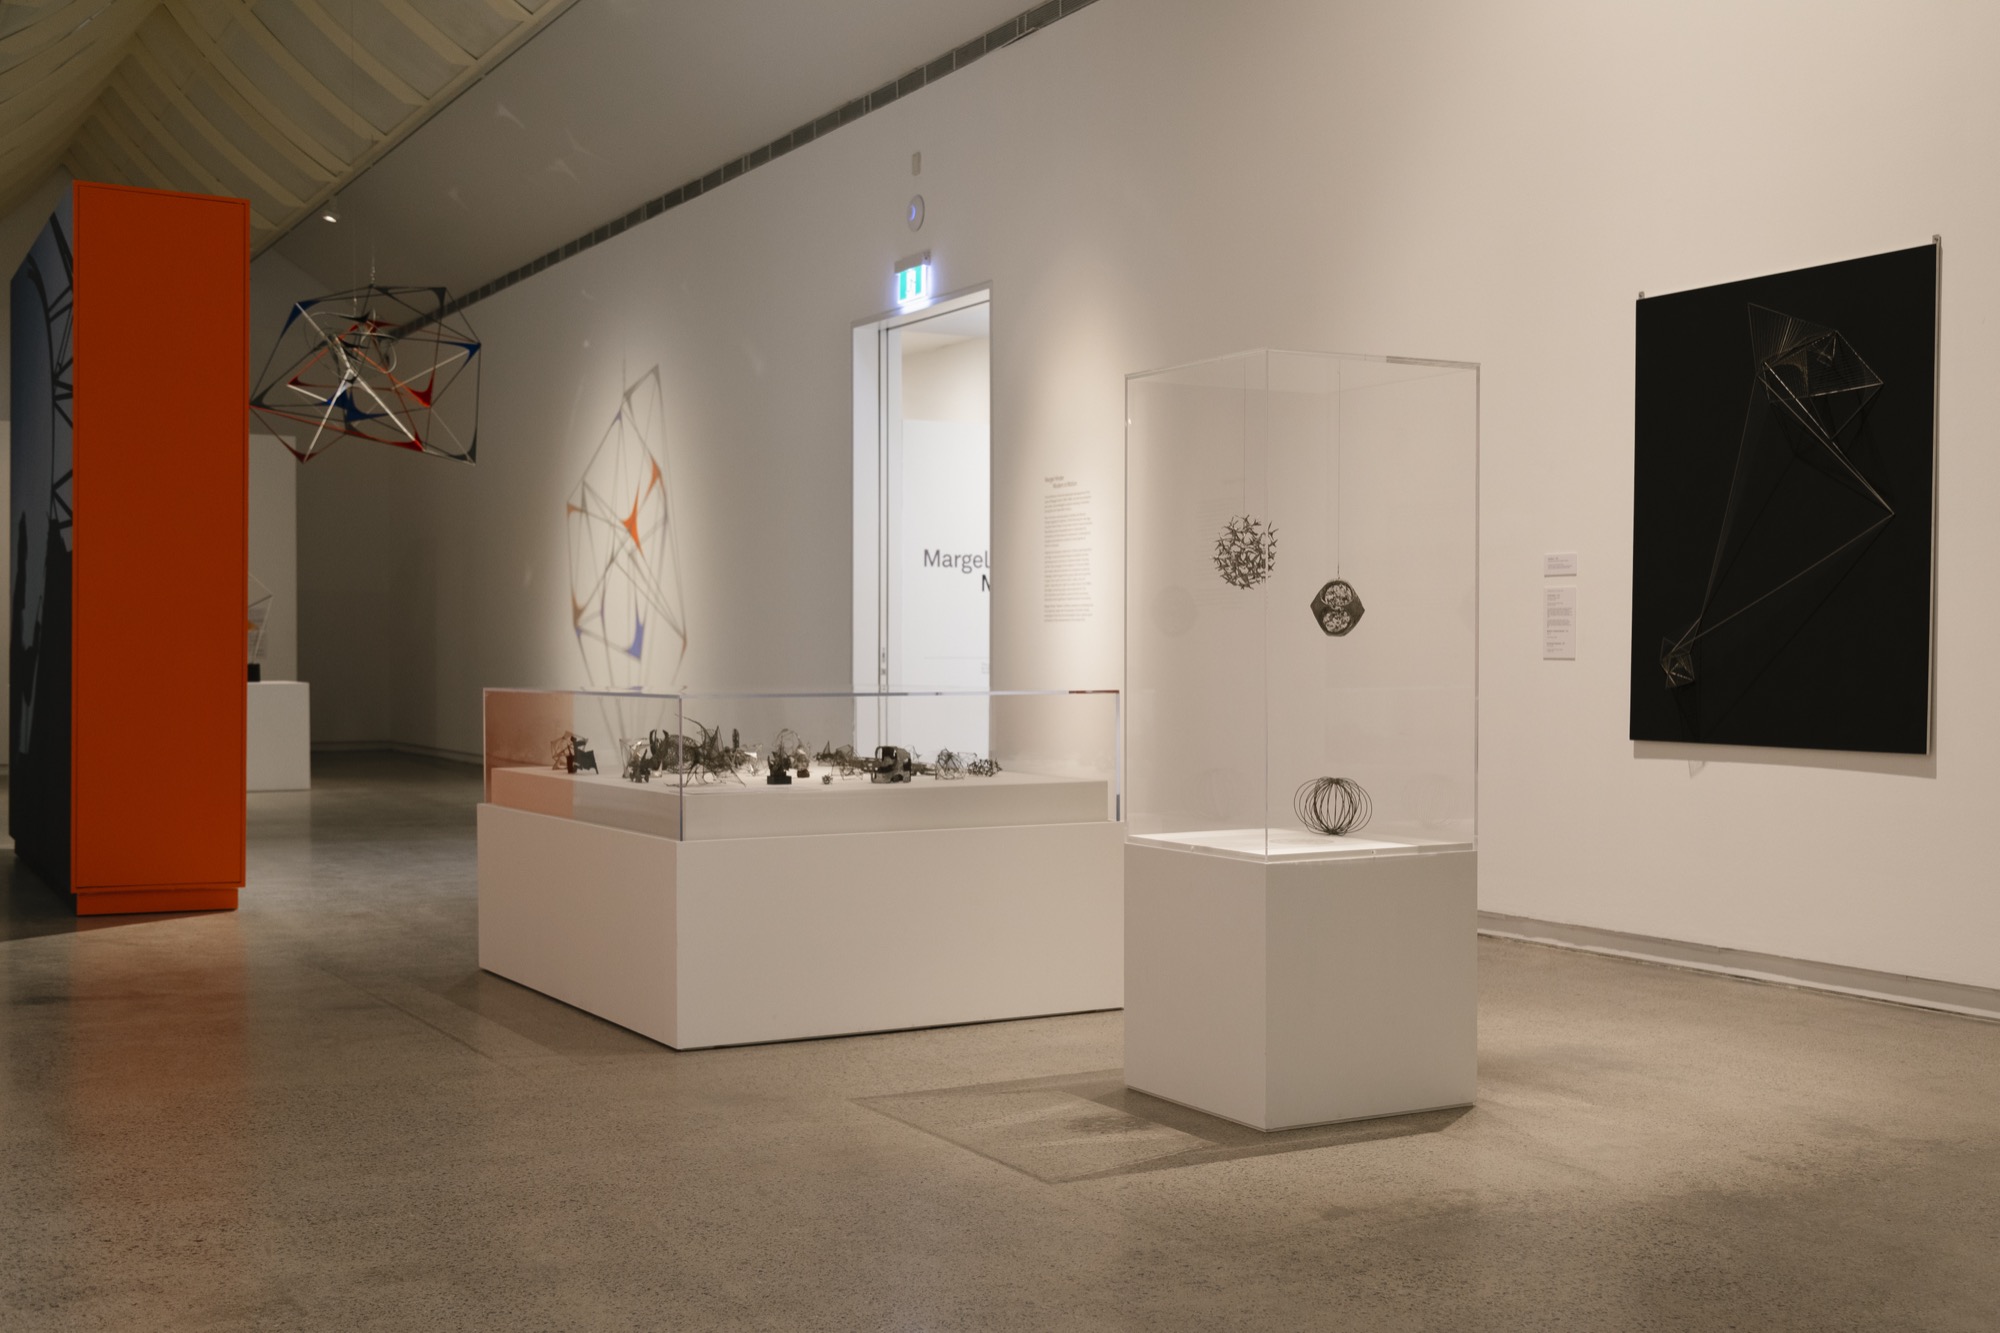 Installation view, Margel Hinder: Modern in Motion, Heide Museum of Modern Art, with 1950s-1960s maquettes for wire and Perspex constructions and mobiles.